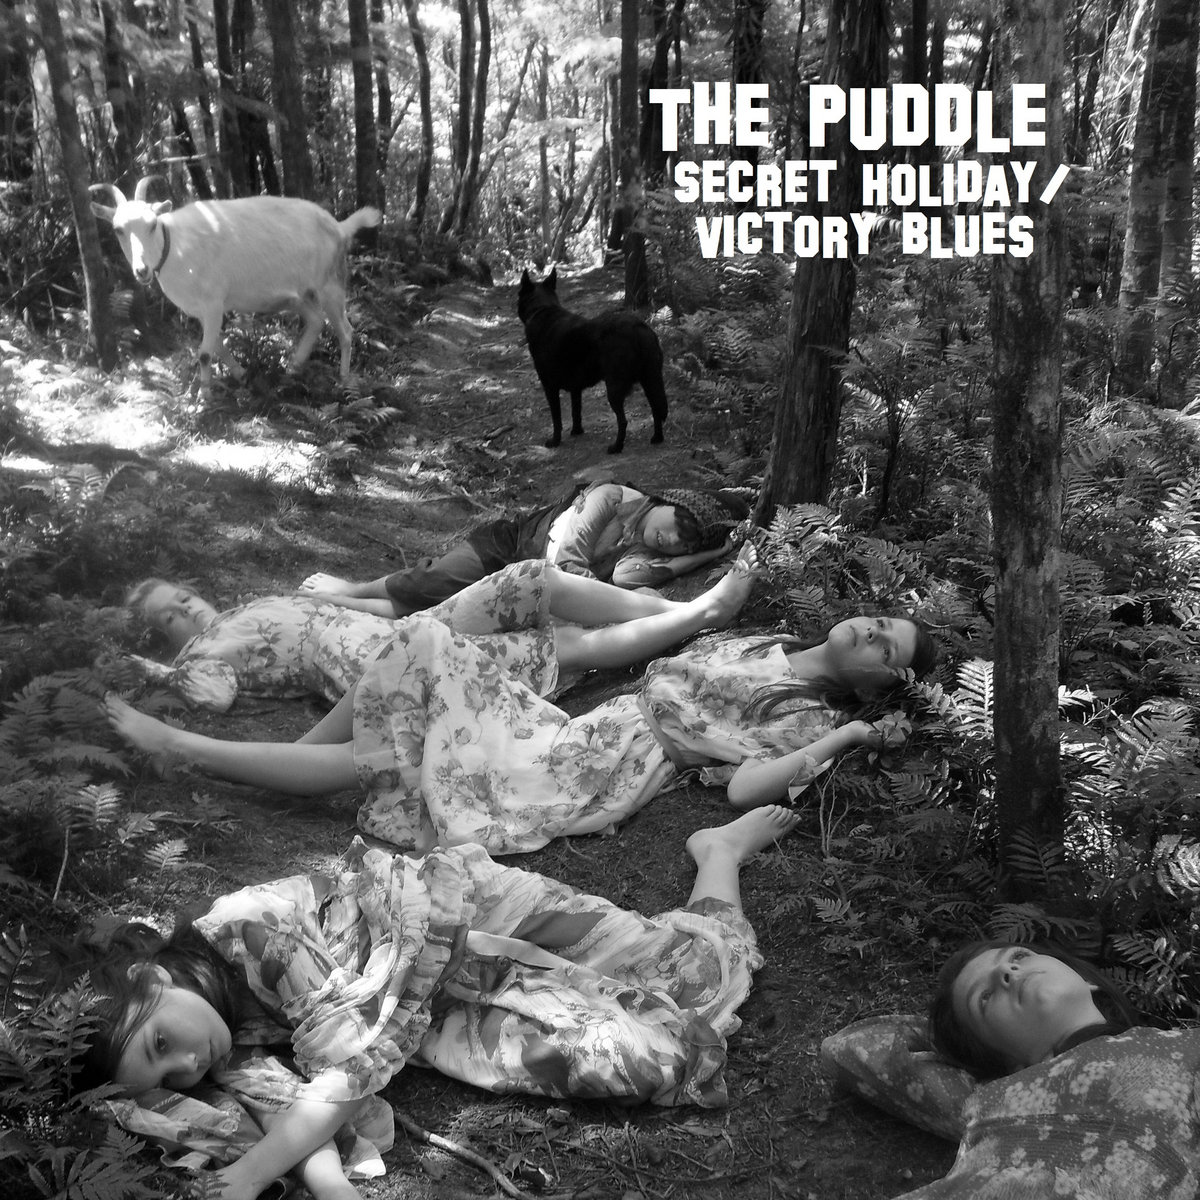 THE PUDDLE – Secret Holiday / Victory Blues